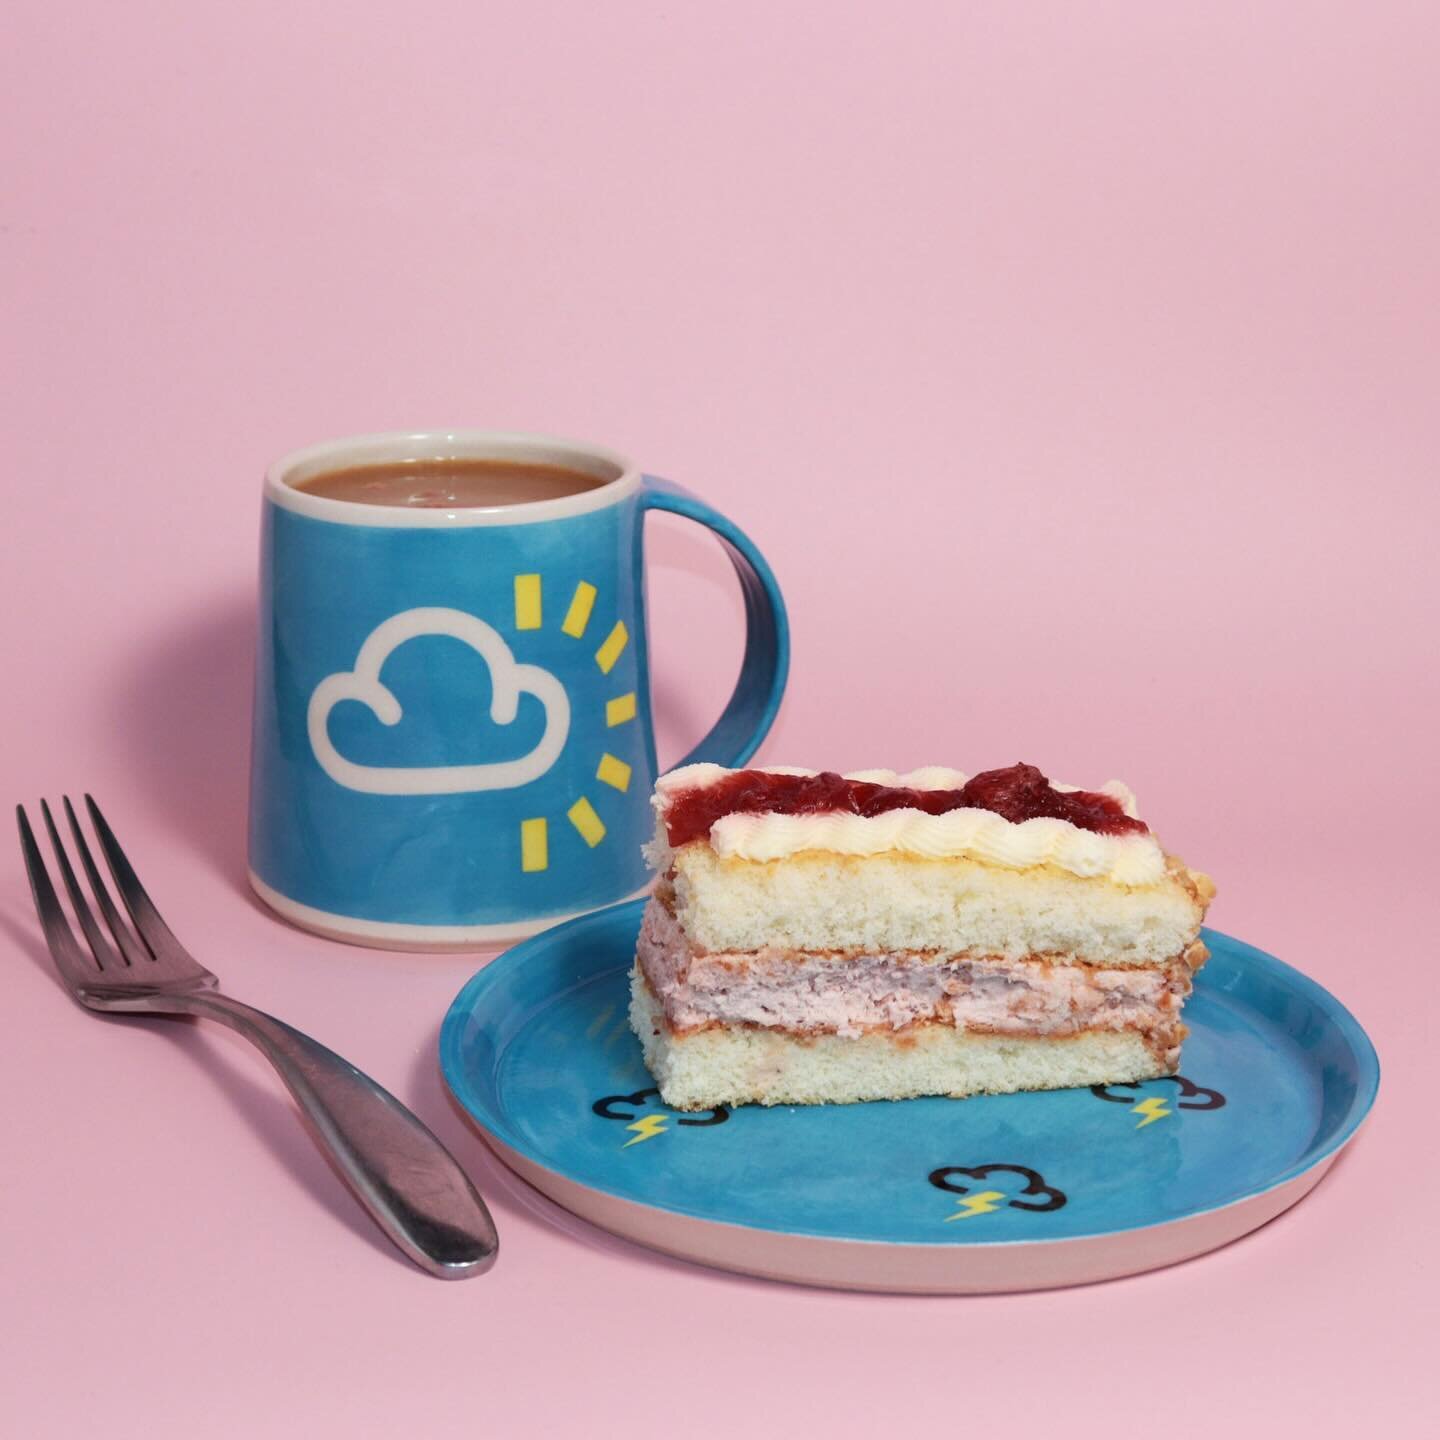 🍰 SHOP UPDATE THURSDAY AT 8PM 🍰

New pots incoming! I&rsquo;m so excited to launch these Thunderstorm cake plates and Tattoo Tea Bag dishes in Thursday&rsquo;s shop update ❤️ Rain or Shine mugs and Heart Tattoo mugs will also be available if you&rs